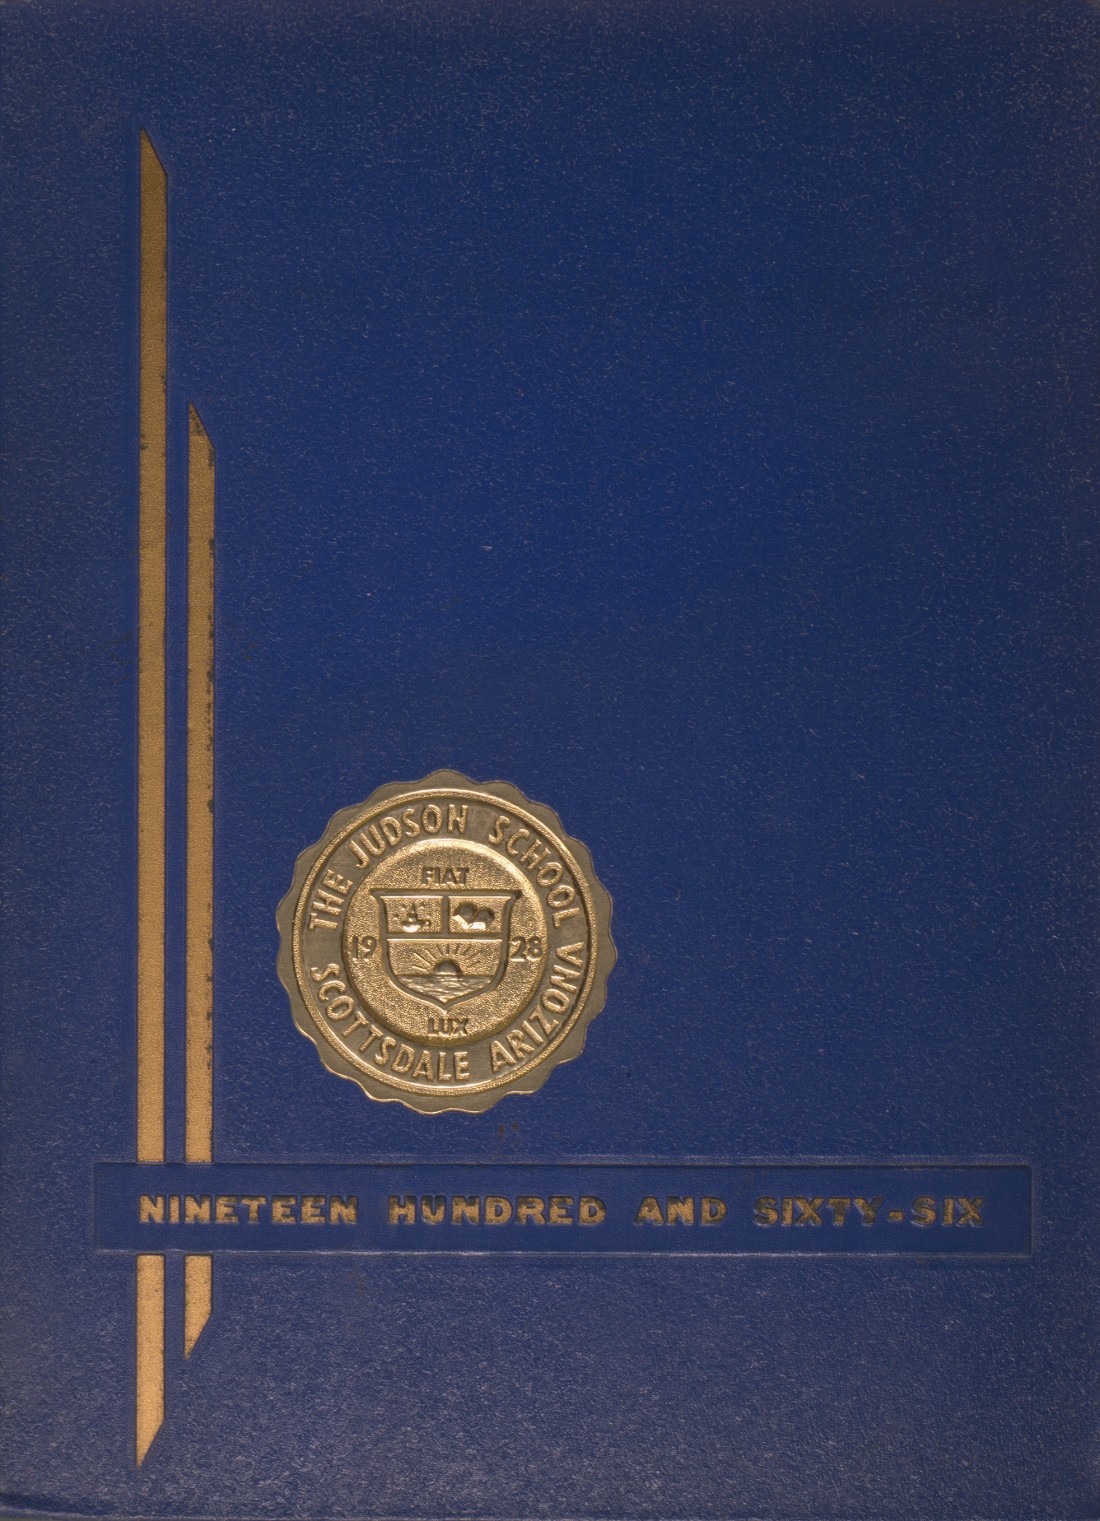 1966 yearbook from Judson School from Scottsdale, Arizona for sale